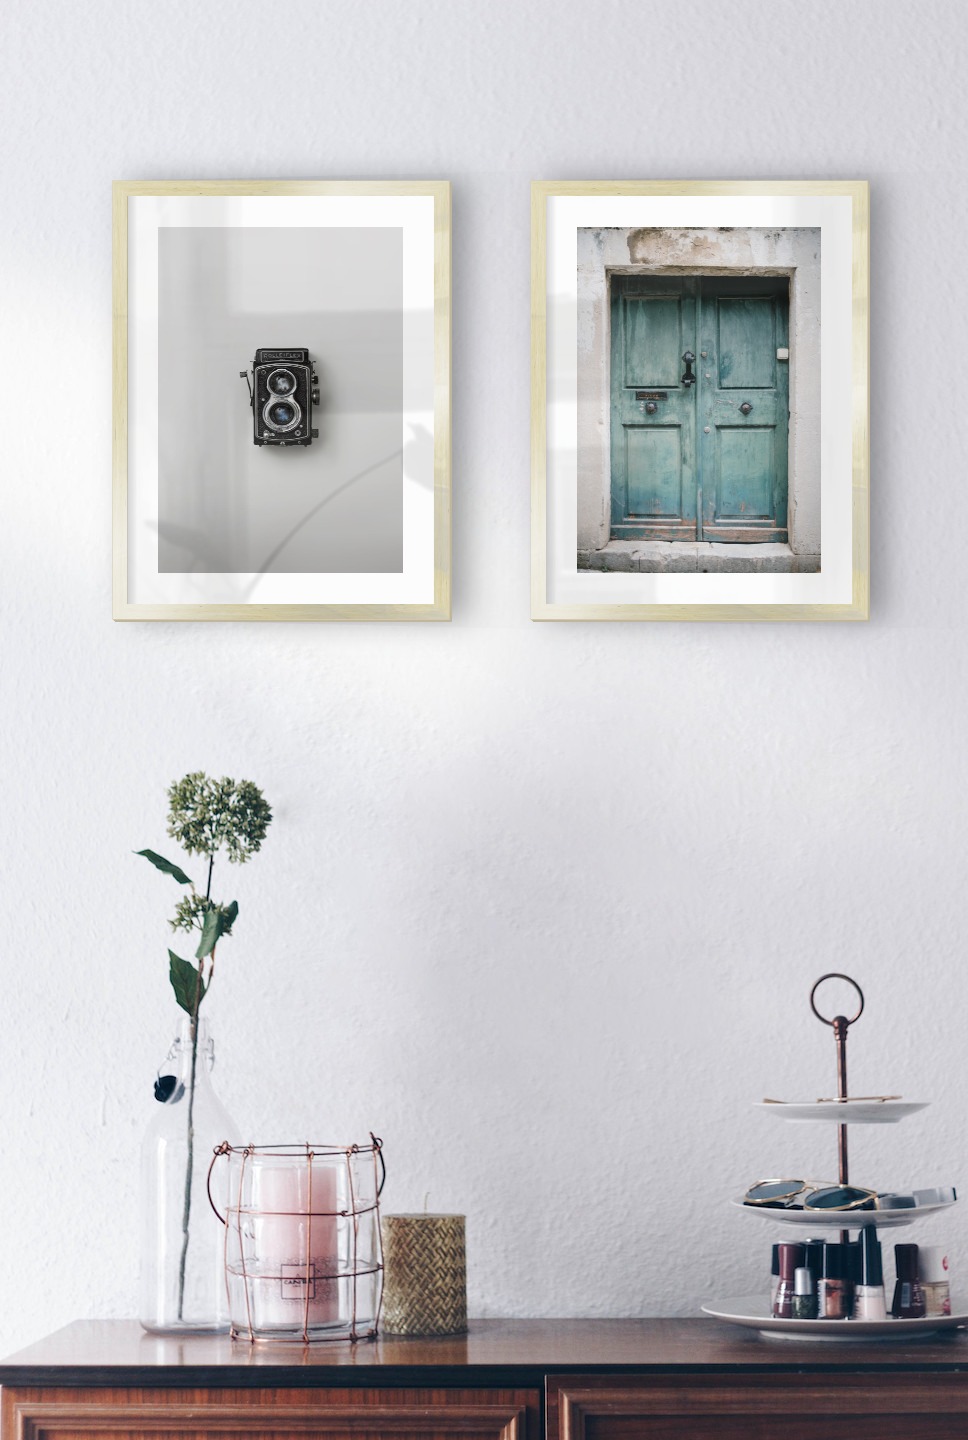 Gallery wall with picture frames in gold in sizes 30x40 with prints "Camera" and "Door"